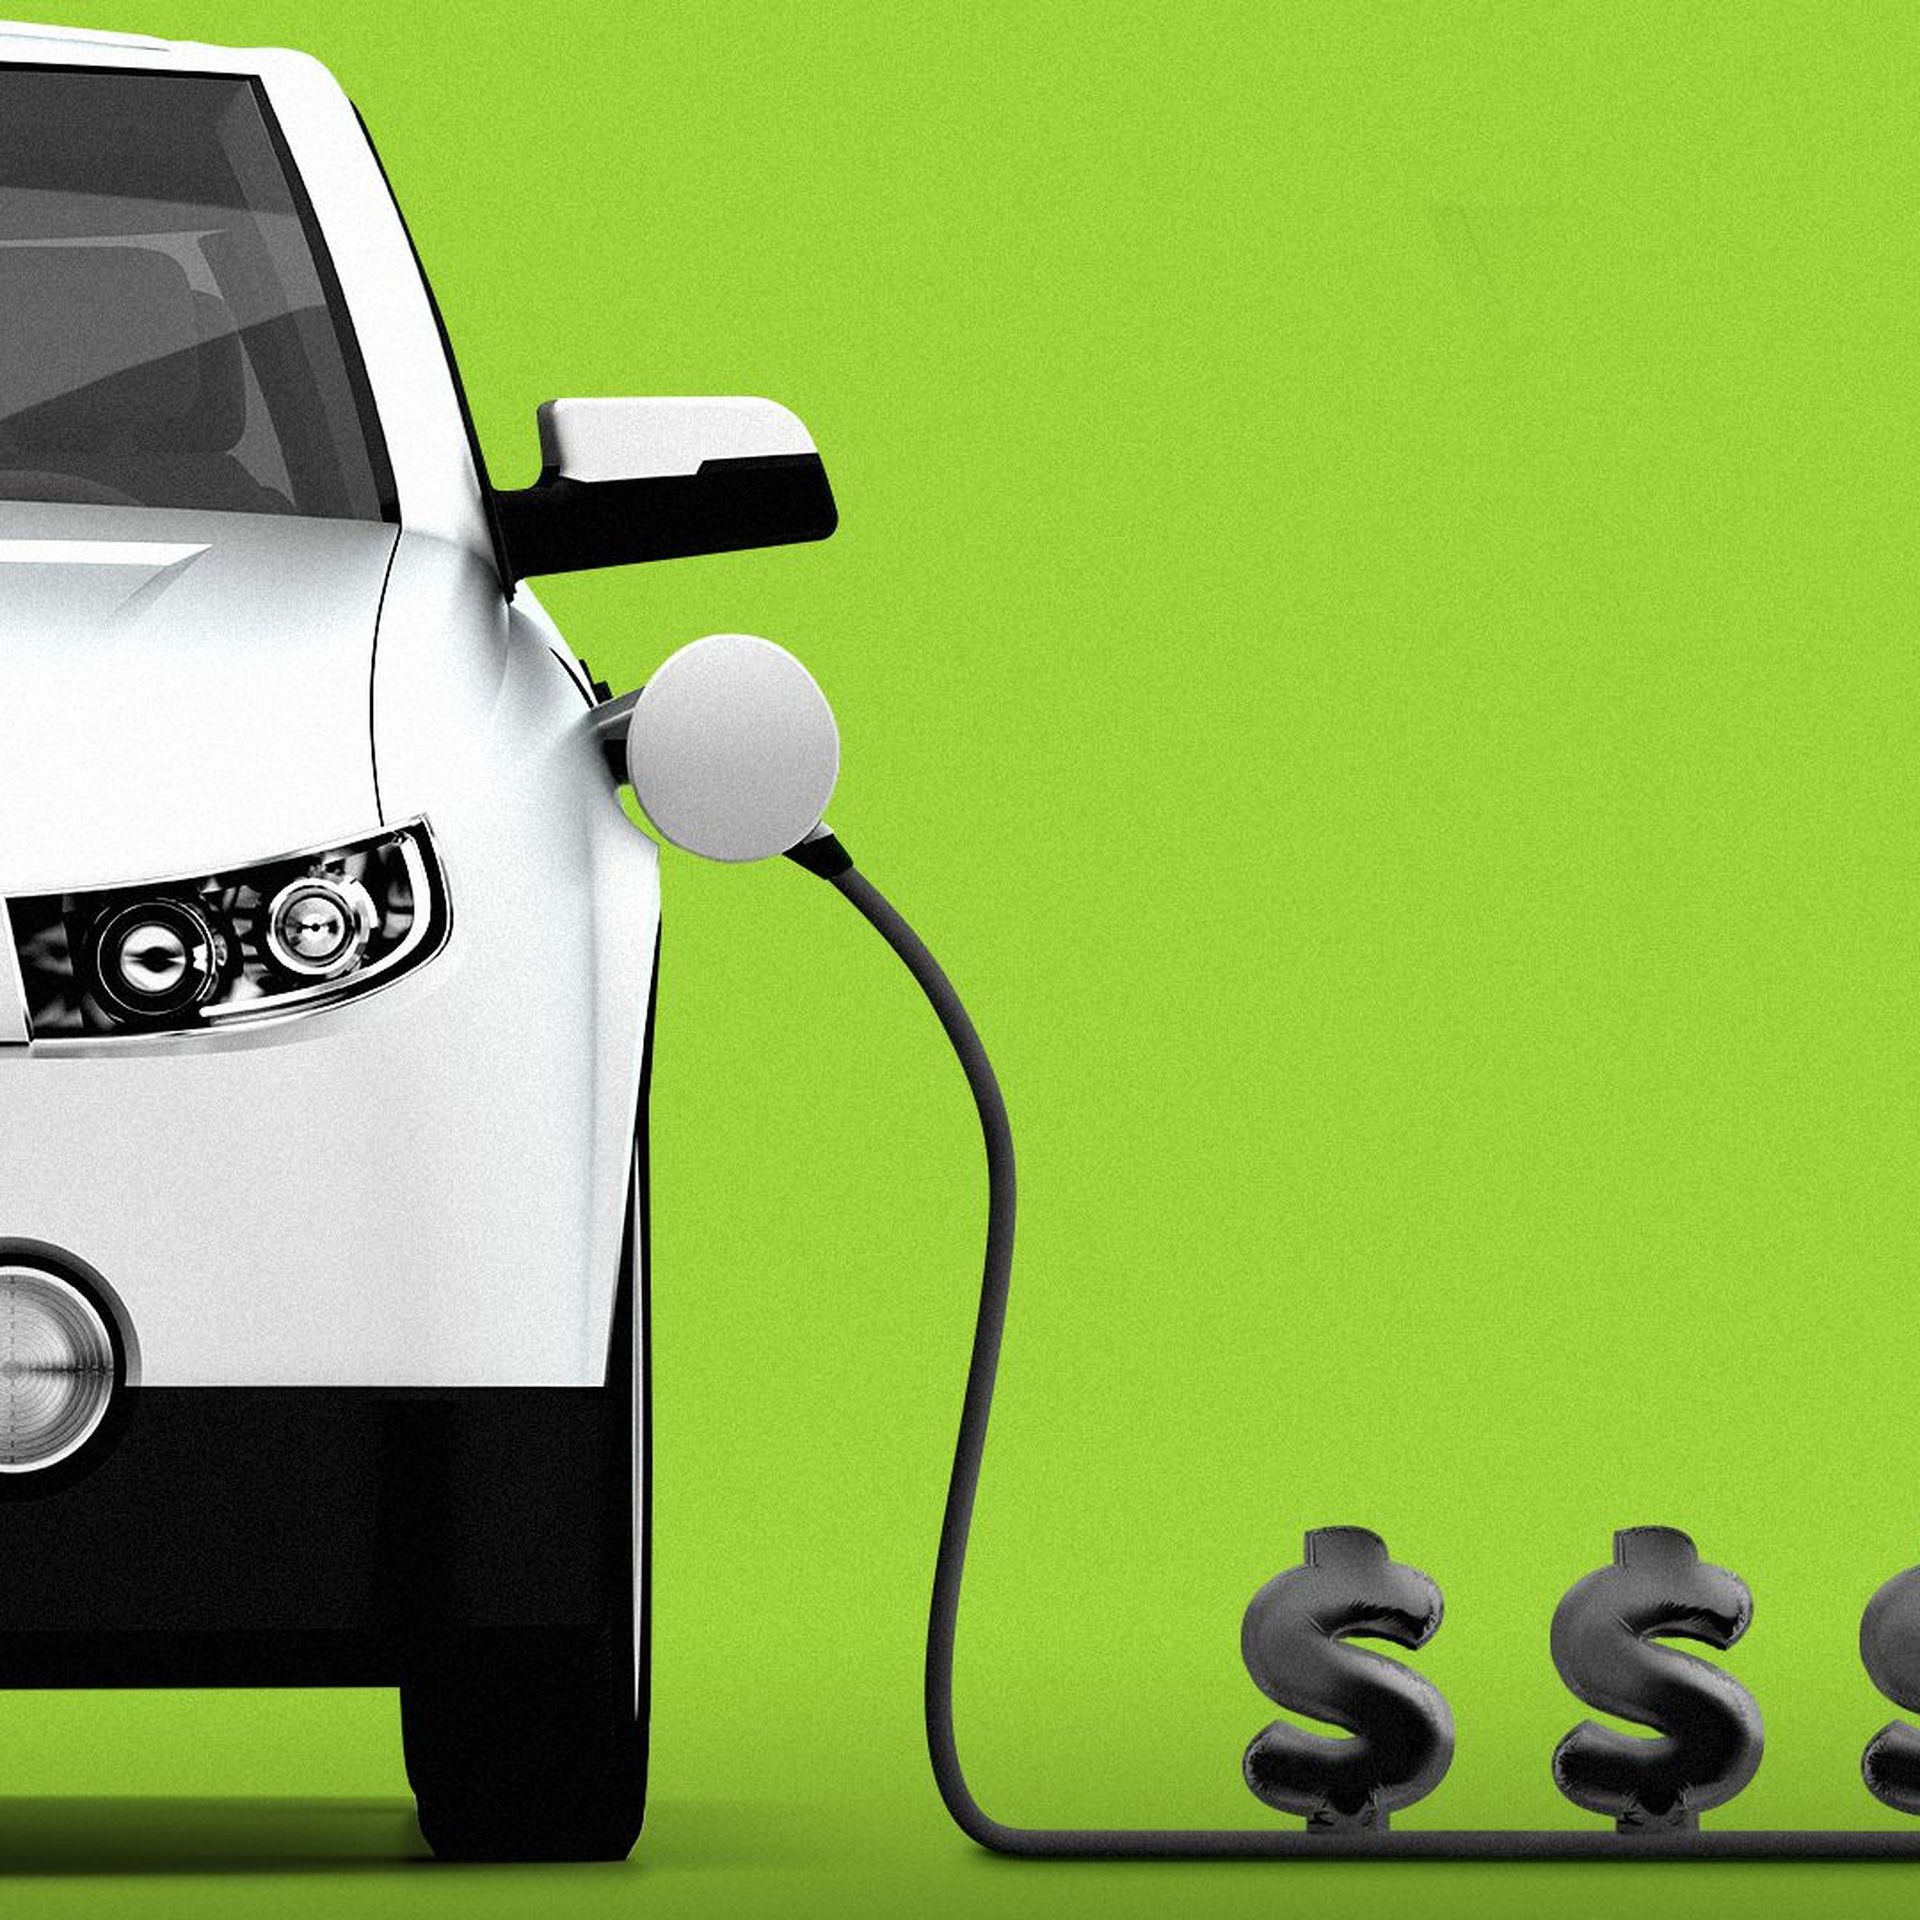 Illustration of an electric vehicle plugged in, the charging wire has dollar bill signs running inside of it towards the car. 